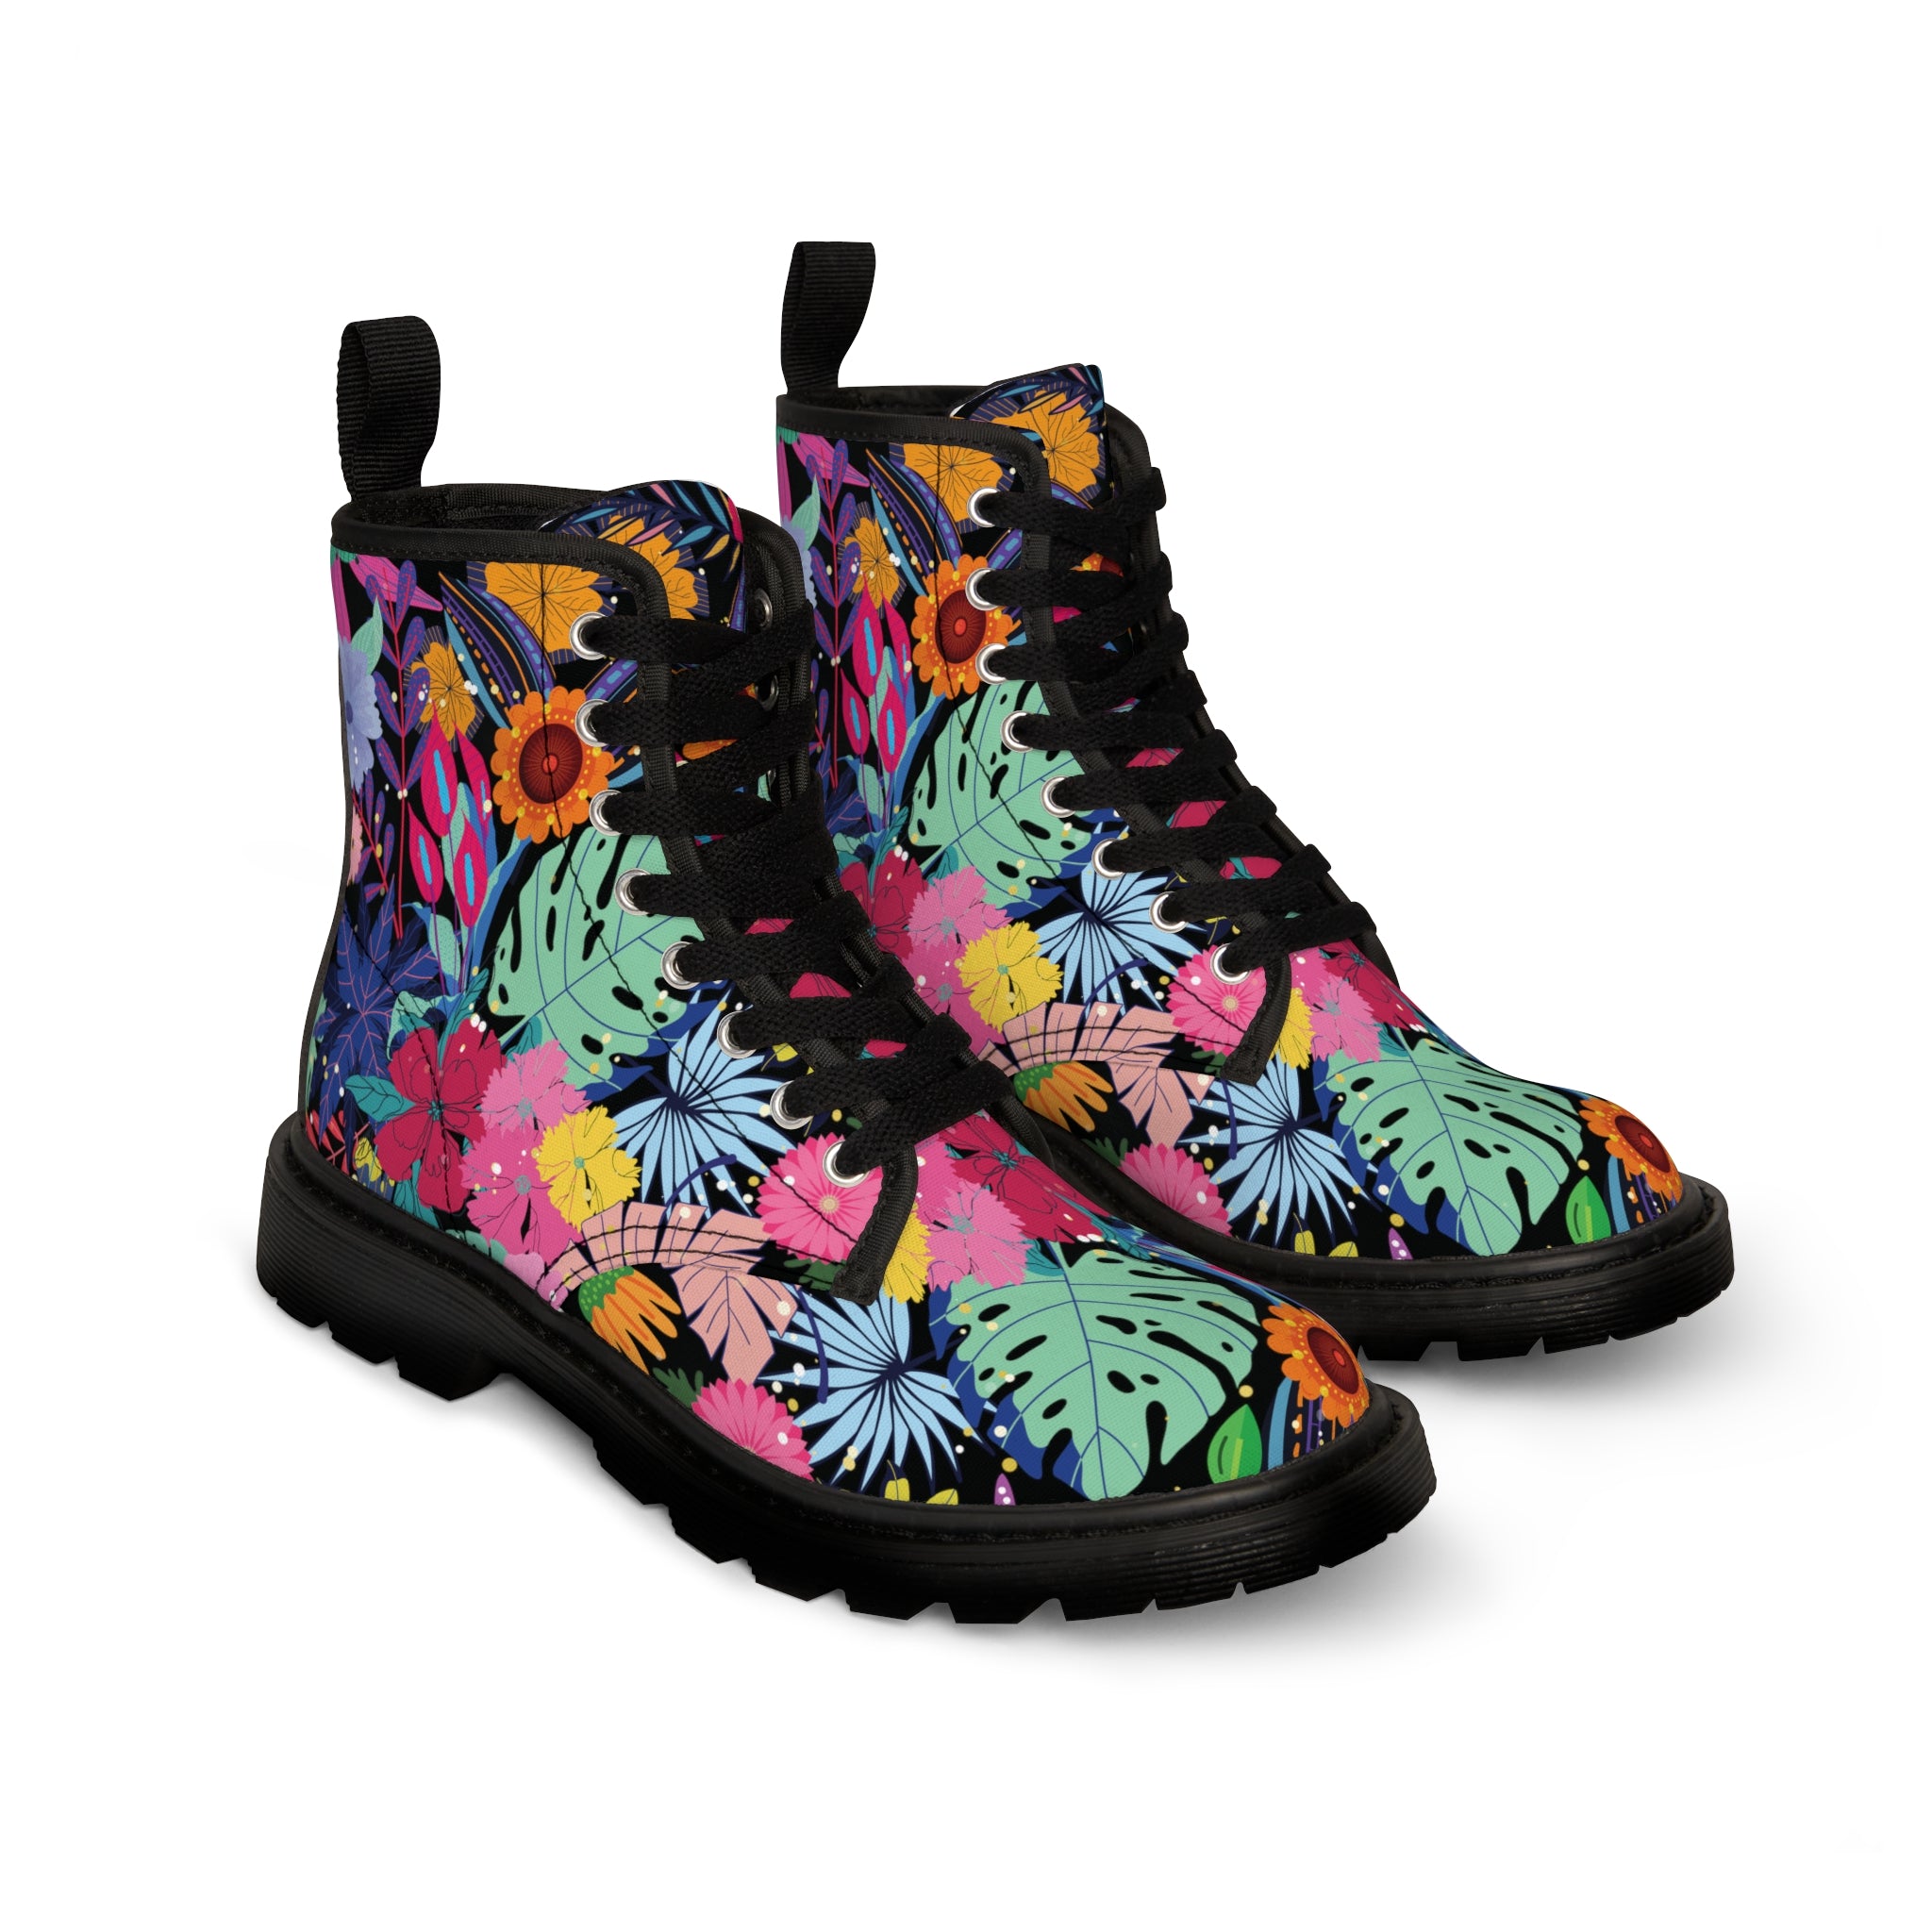 Custom Designer Canvas Lace up Boots for Women with Colorful Floral Prints in Black, Perfect Luxury Gift for Girlfriend